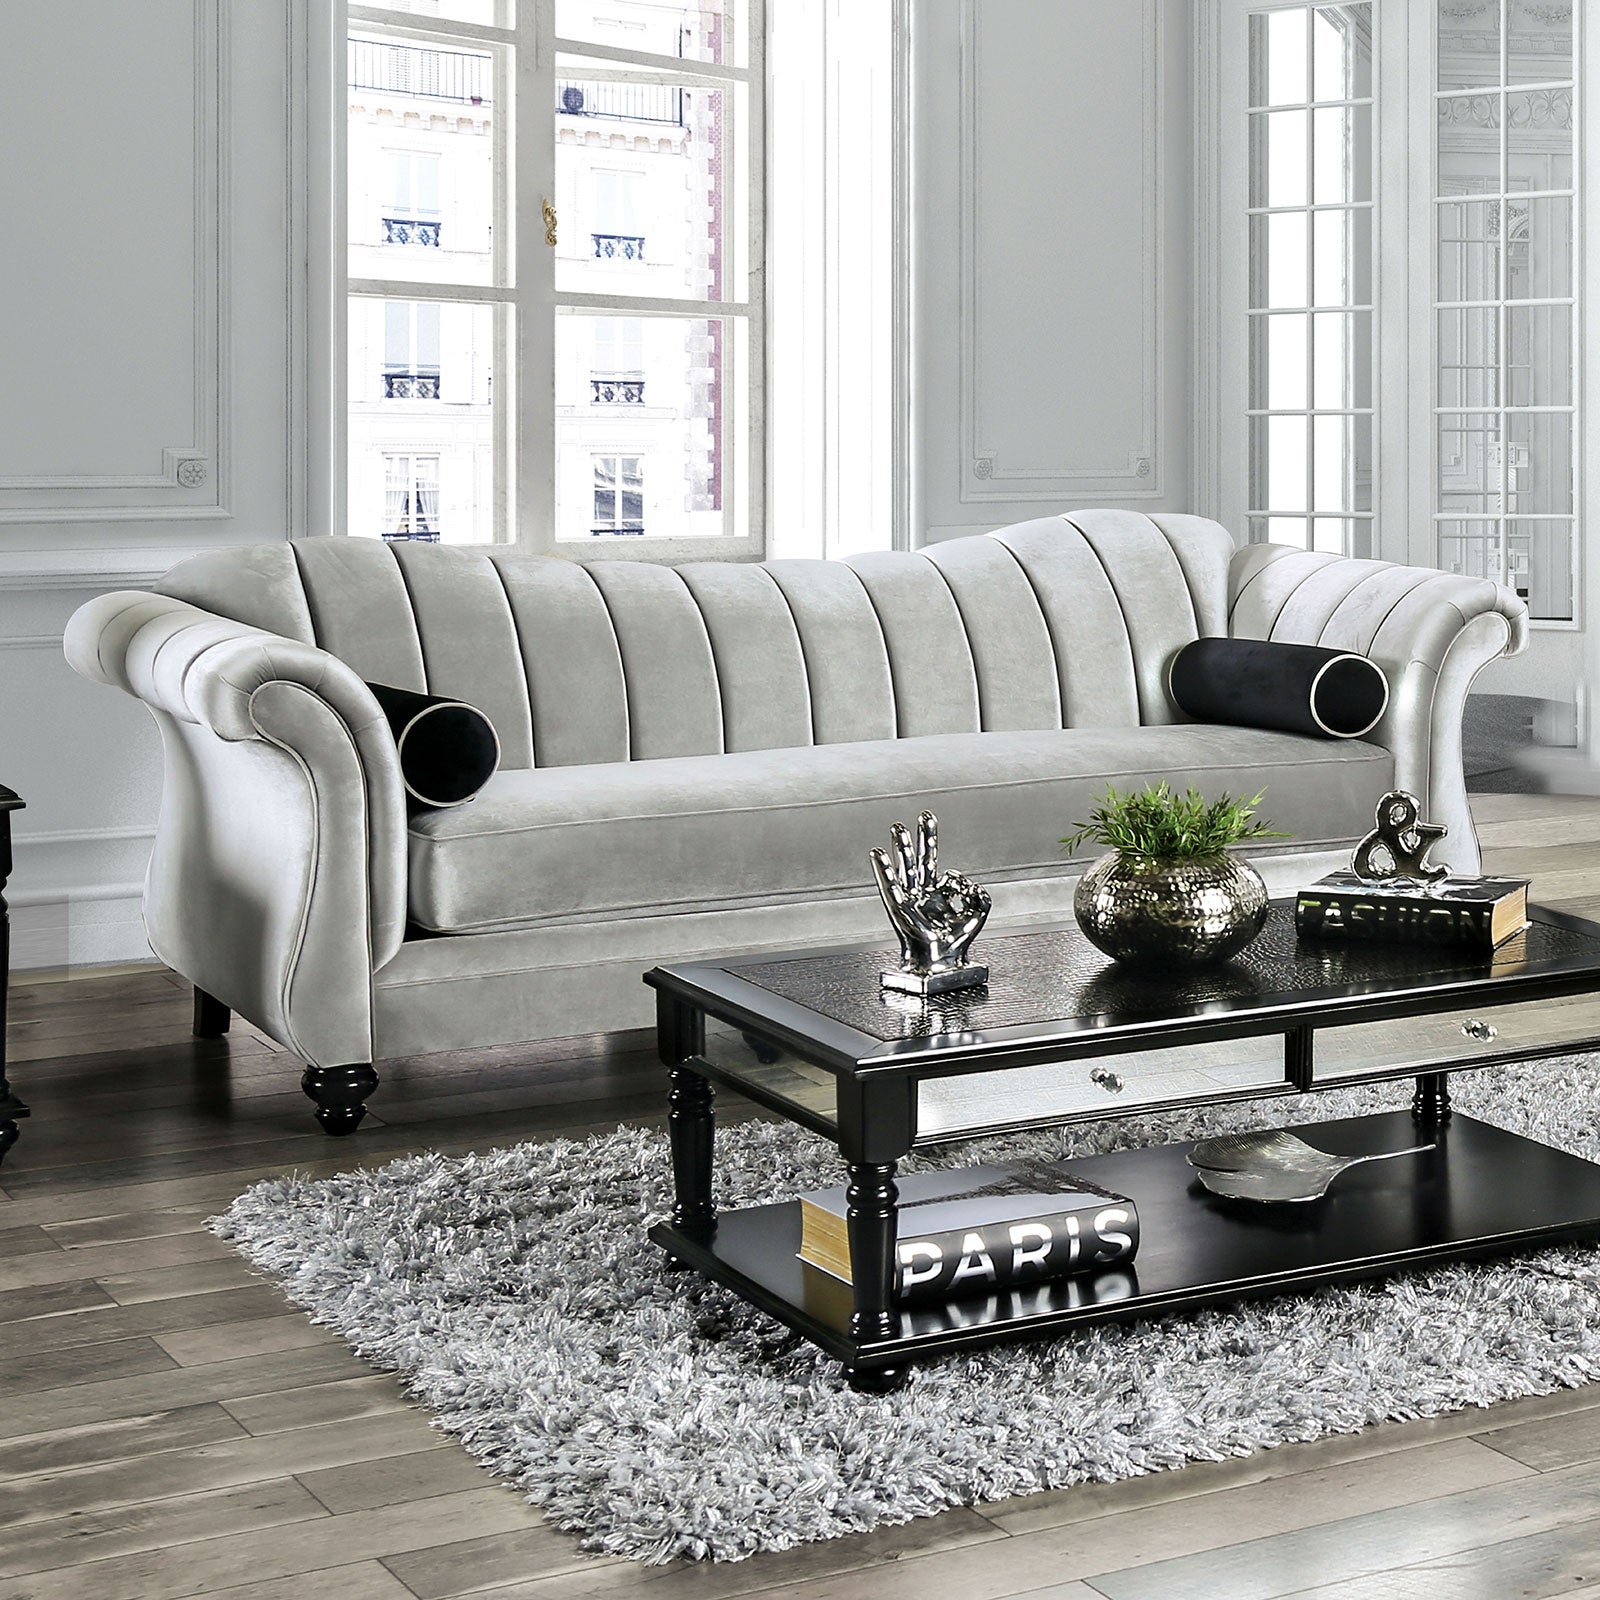 Marvin Pewter Sofa image